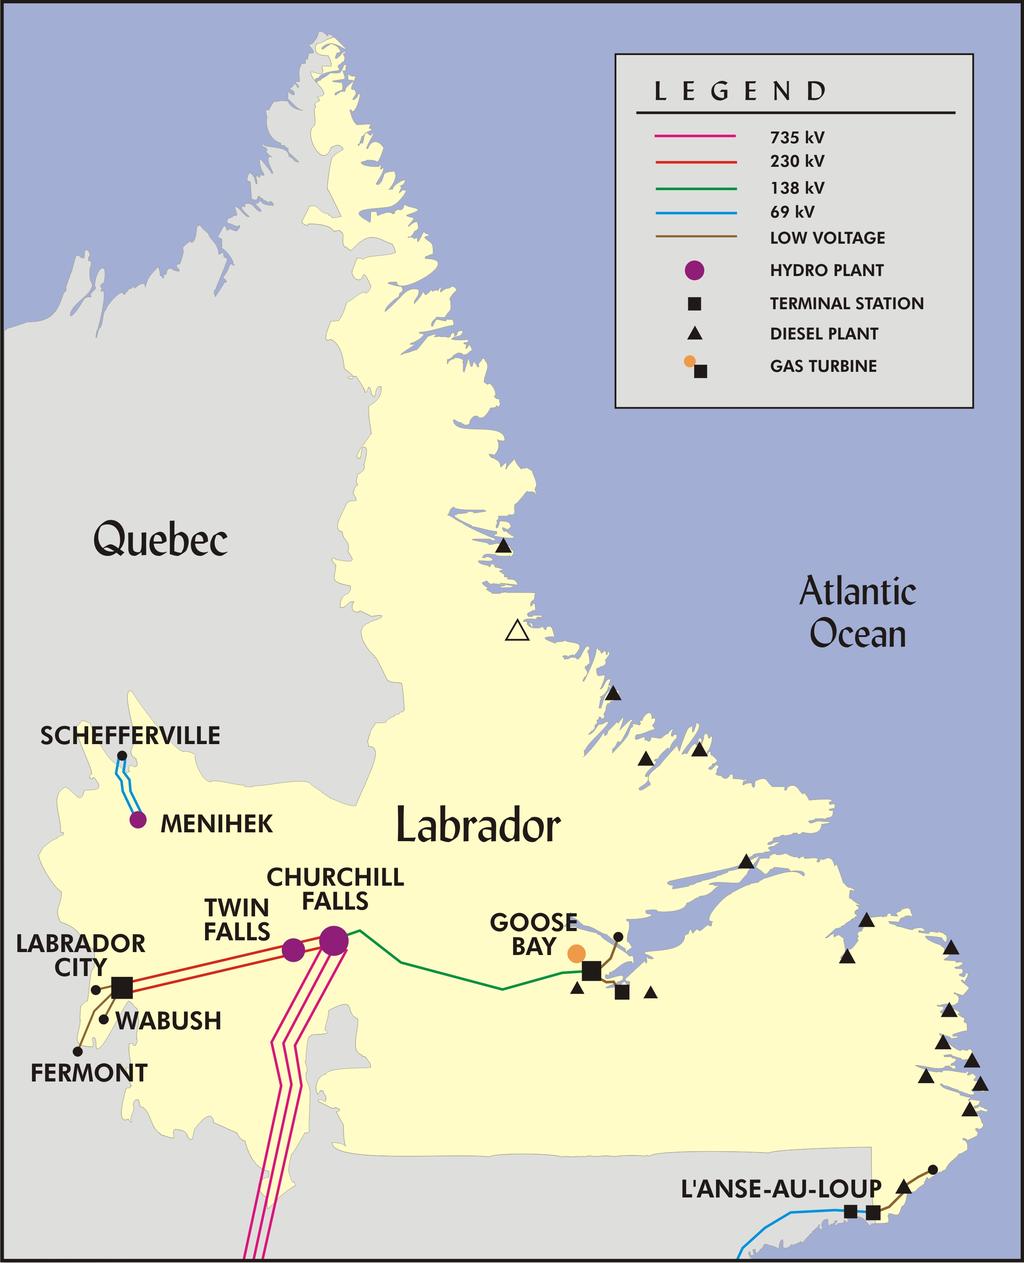 Figure 9: Labrador Electricity System Map Source: NLH The Labrador electricity system depicted in Figure 9 consists of several 735 kv, 230 kv, and 138 kv lines that originate at Churchill Falls.